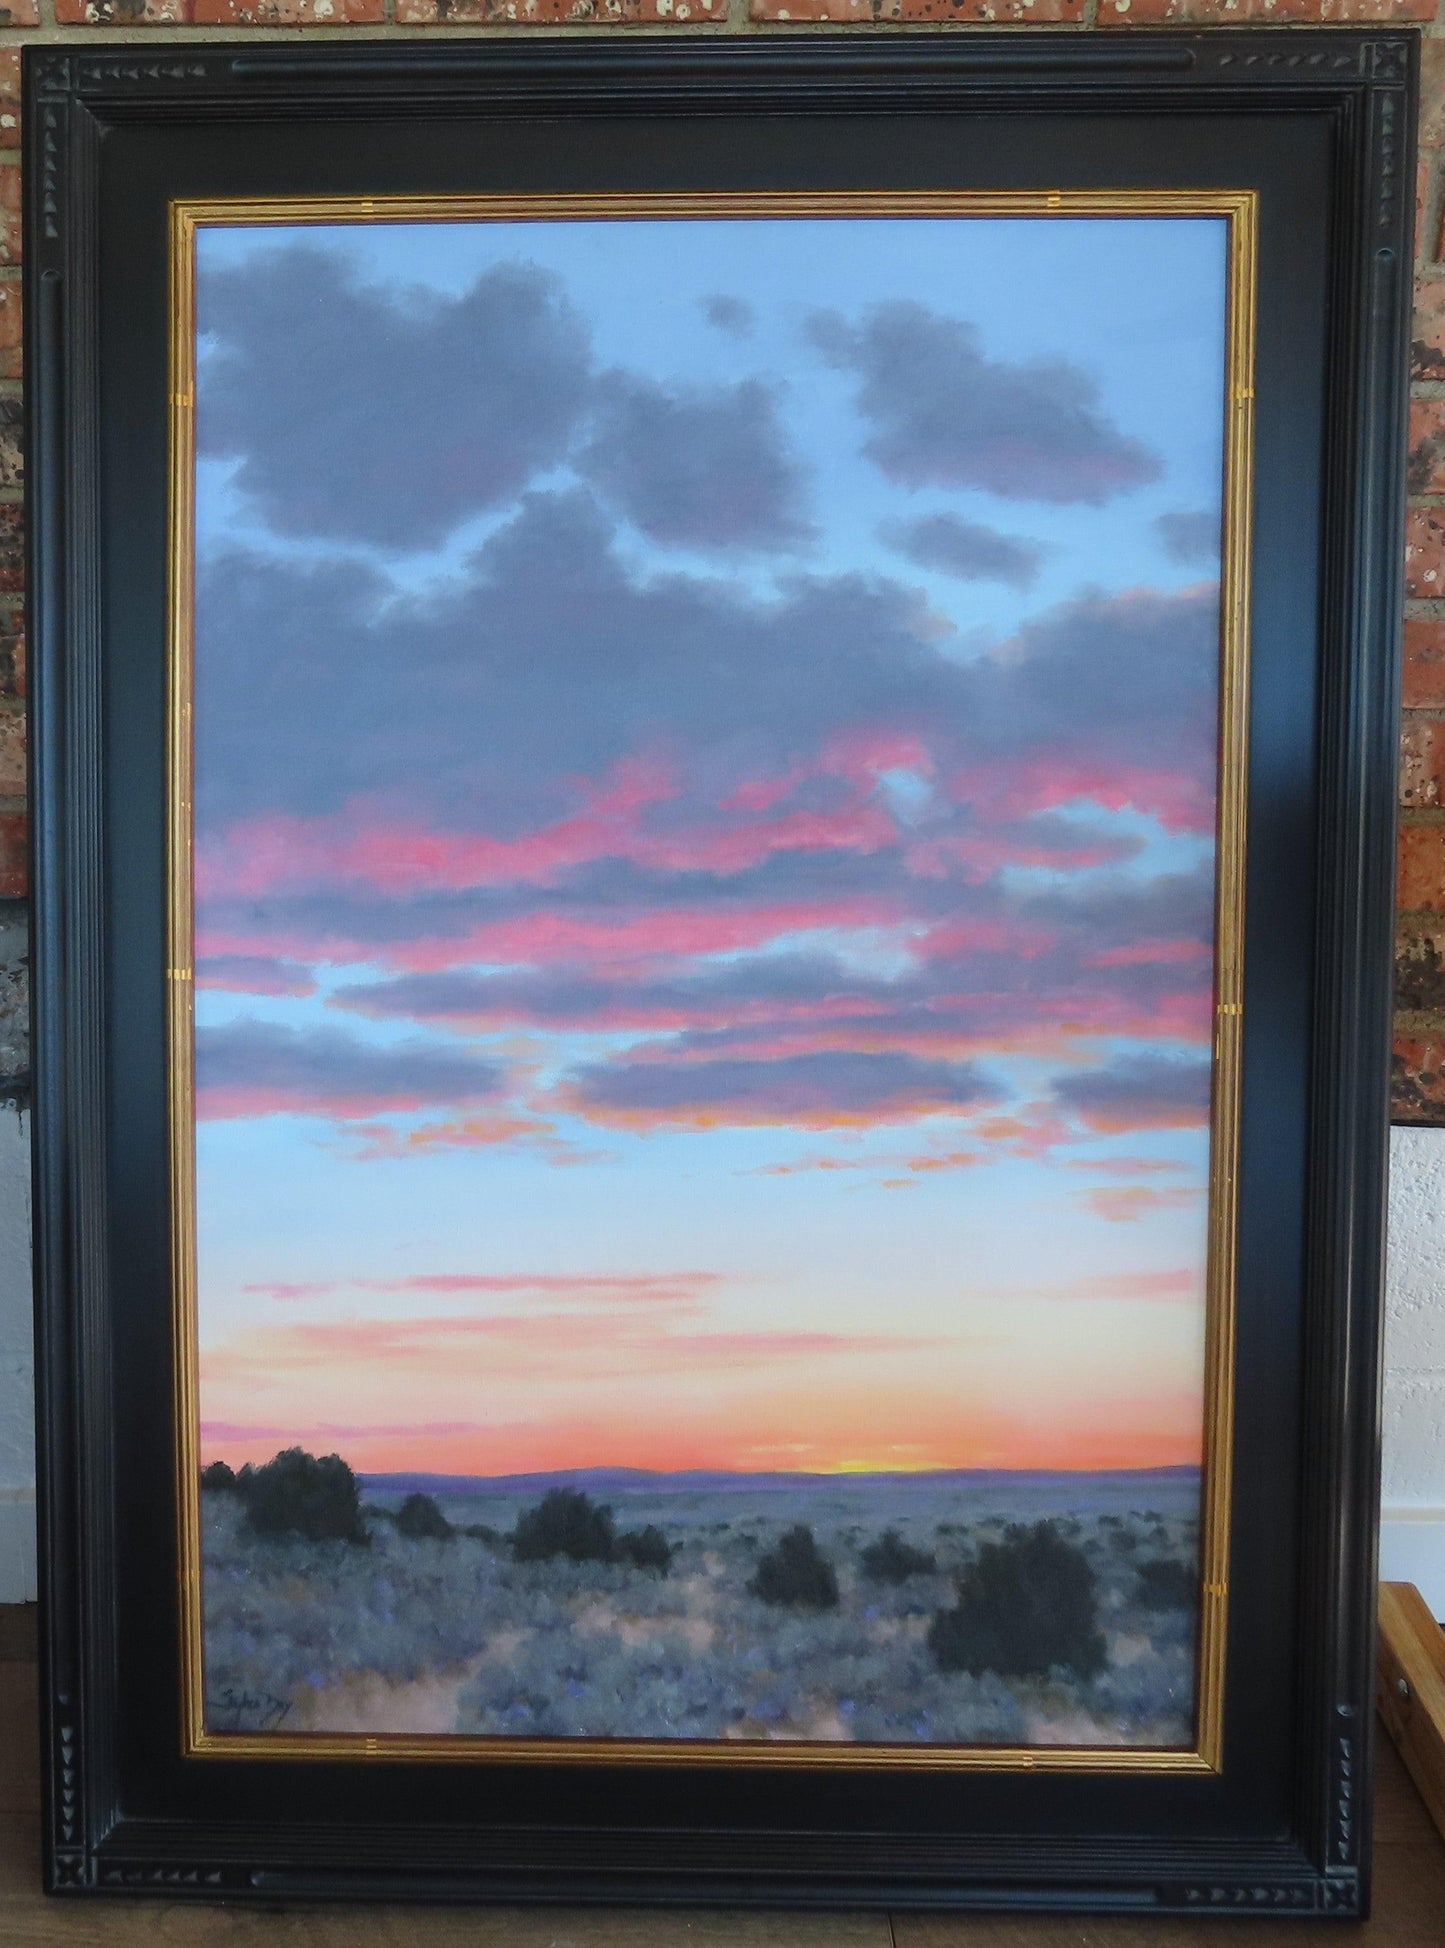 Sunset View Near Taos-painting-Stephen Day-Sorrel Sky Gallery